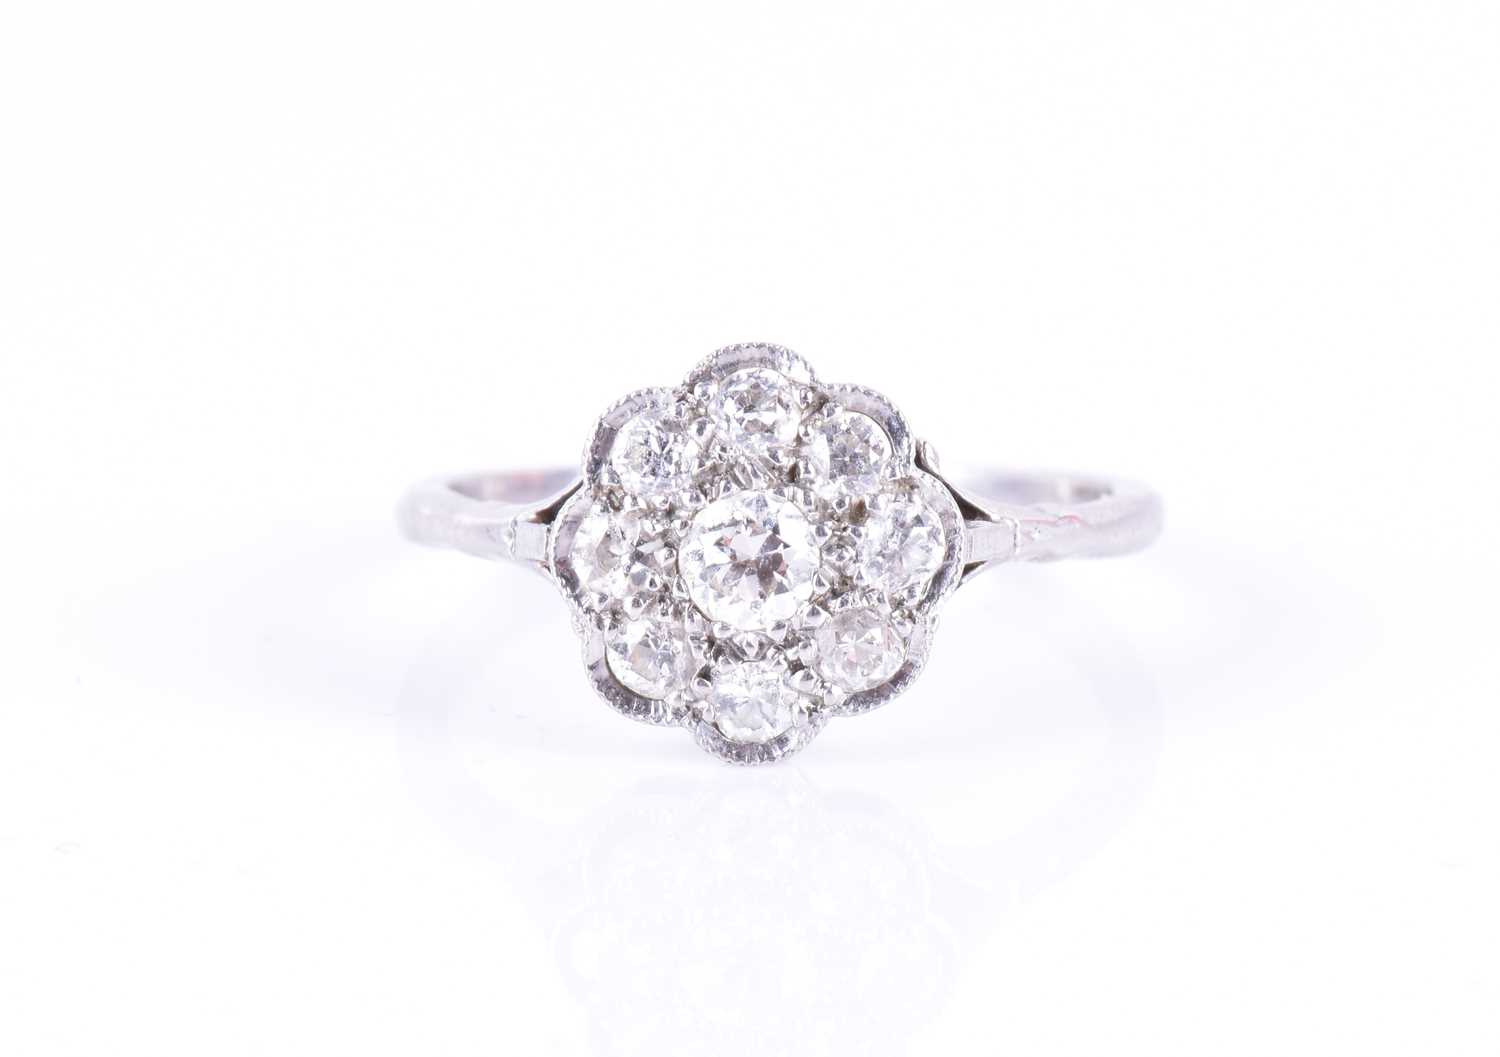 An early to mid 20th century diamond floral cluster ringset with round-cut diamonds of approximately